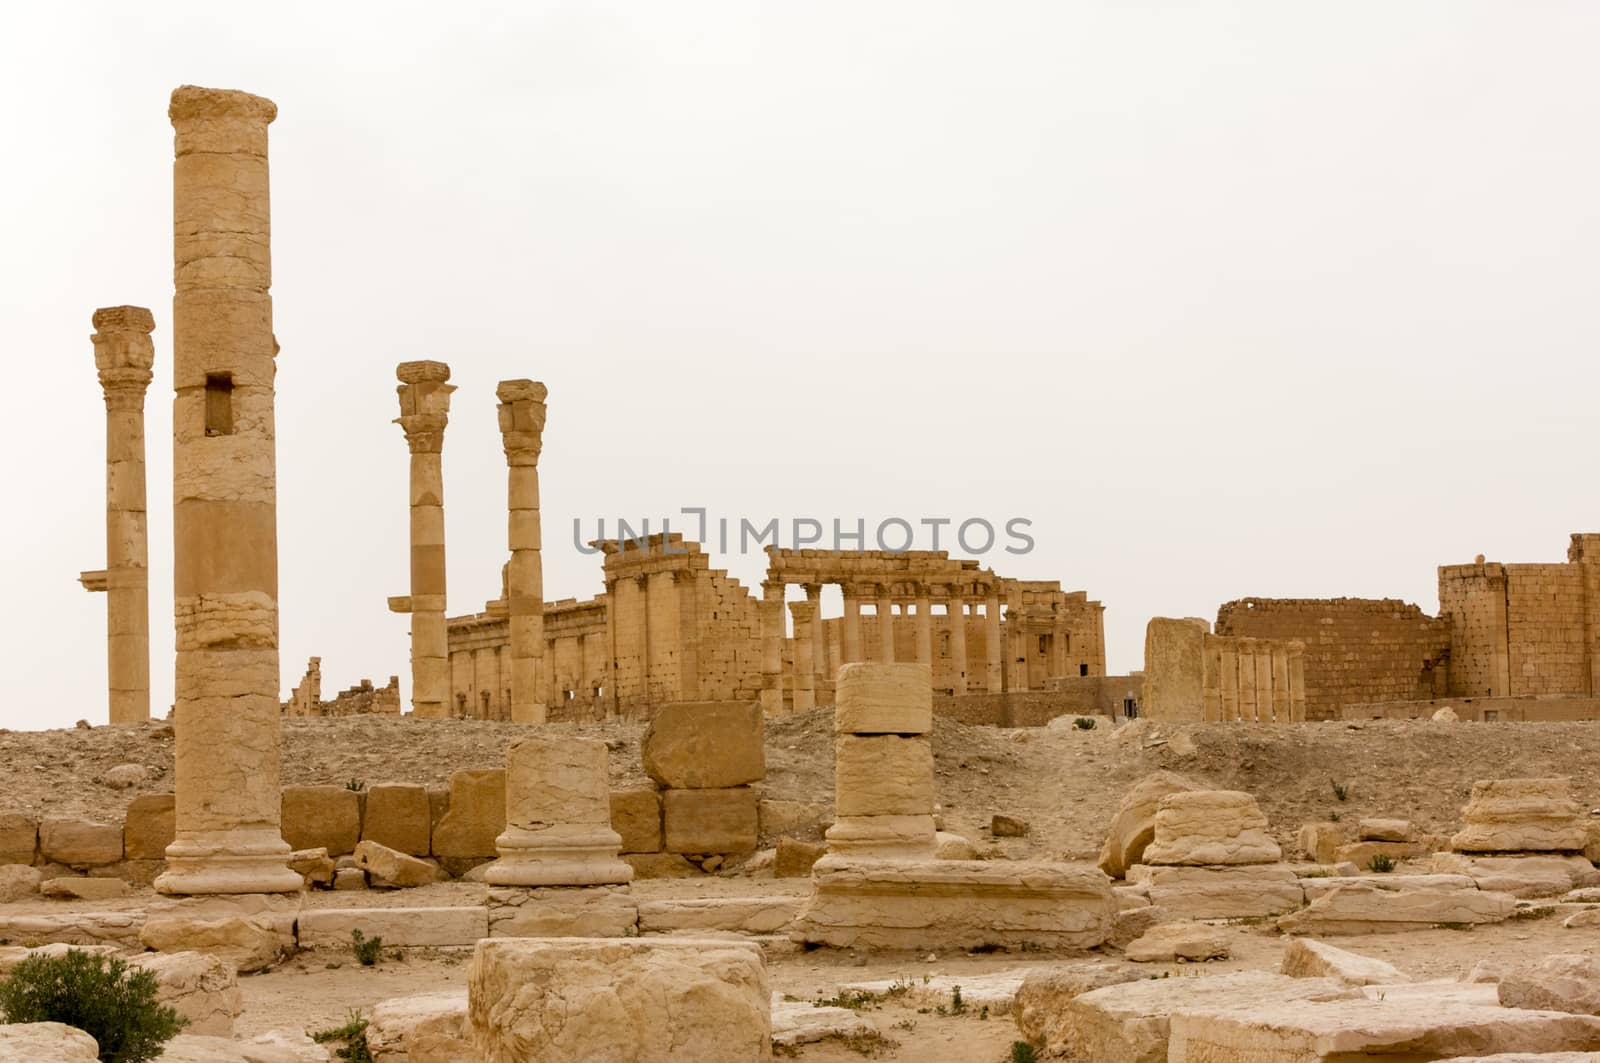 Palmyre Syria 2009 The ruins of an ancient city dating from the Roman period by kgboxford